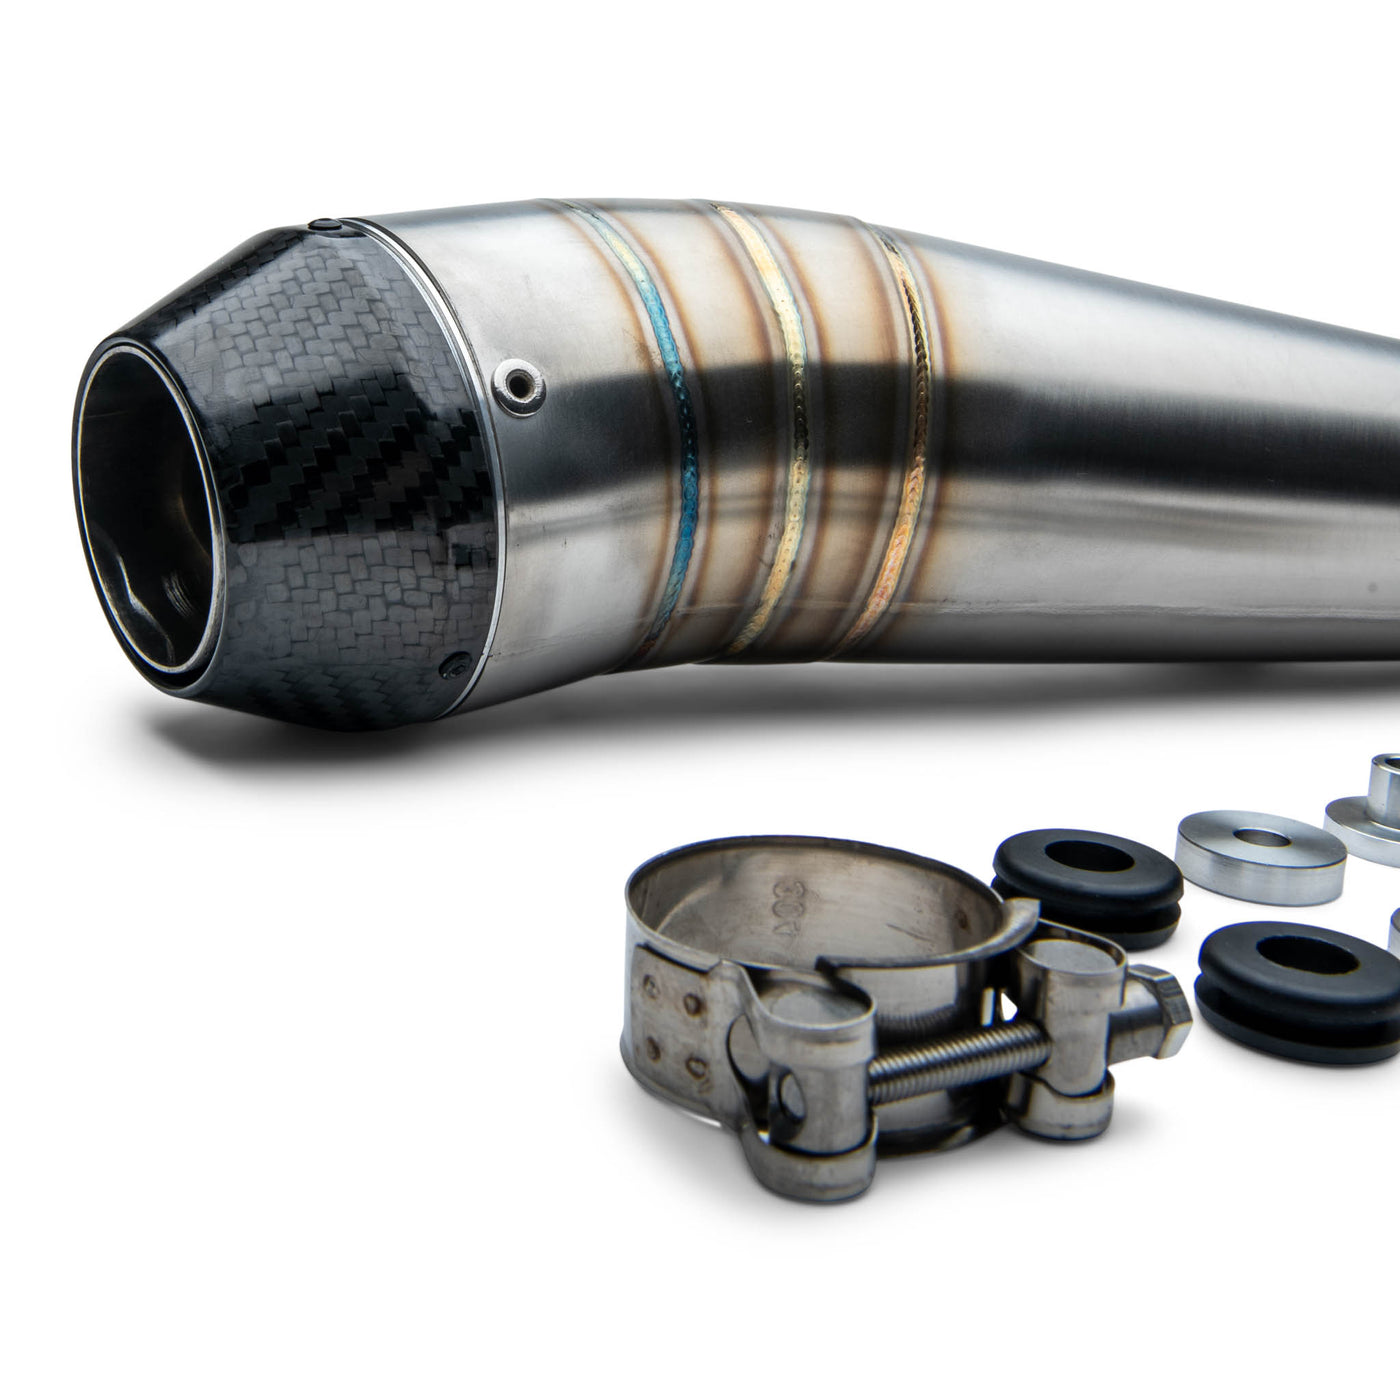 GP Carbon Slip On Exhaust for Triumph Motorcycles